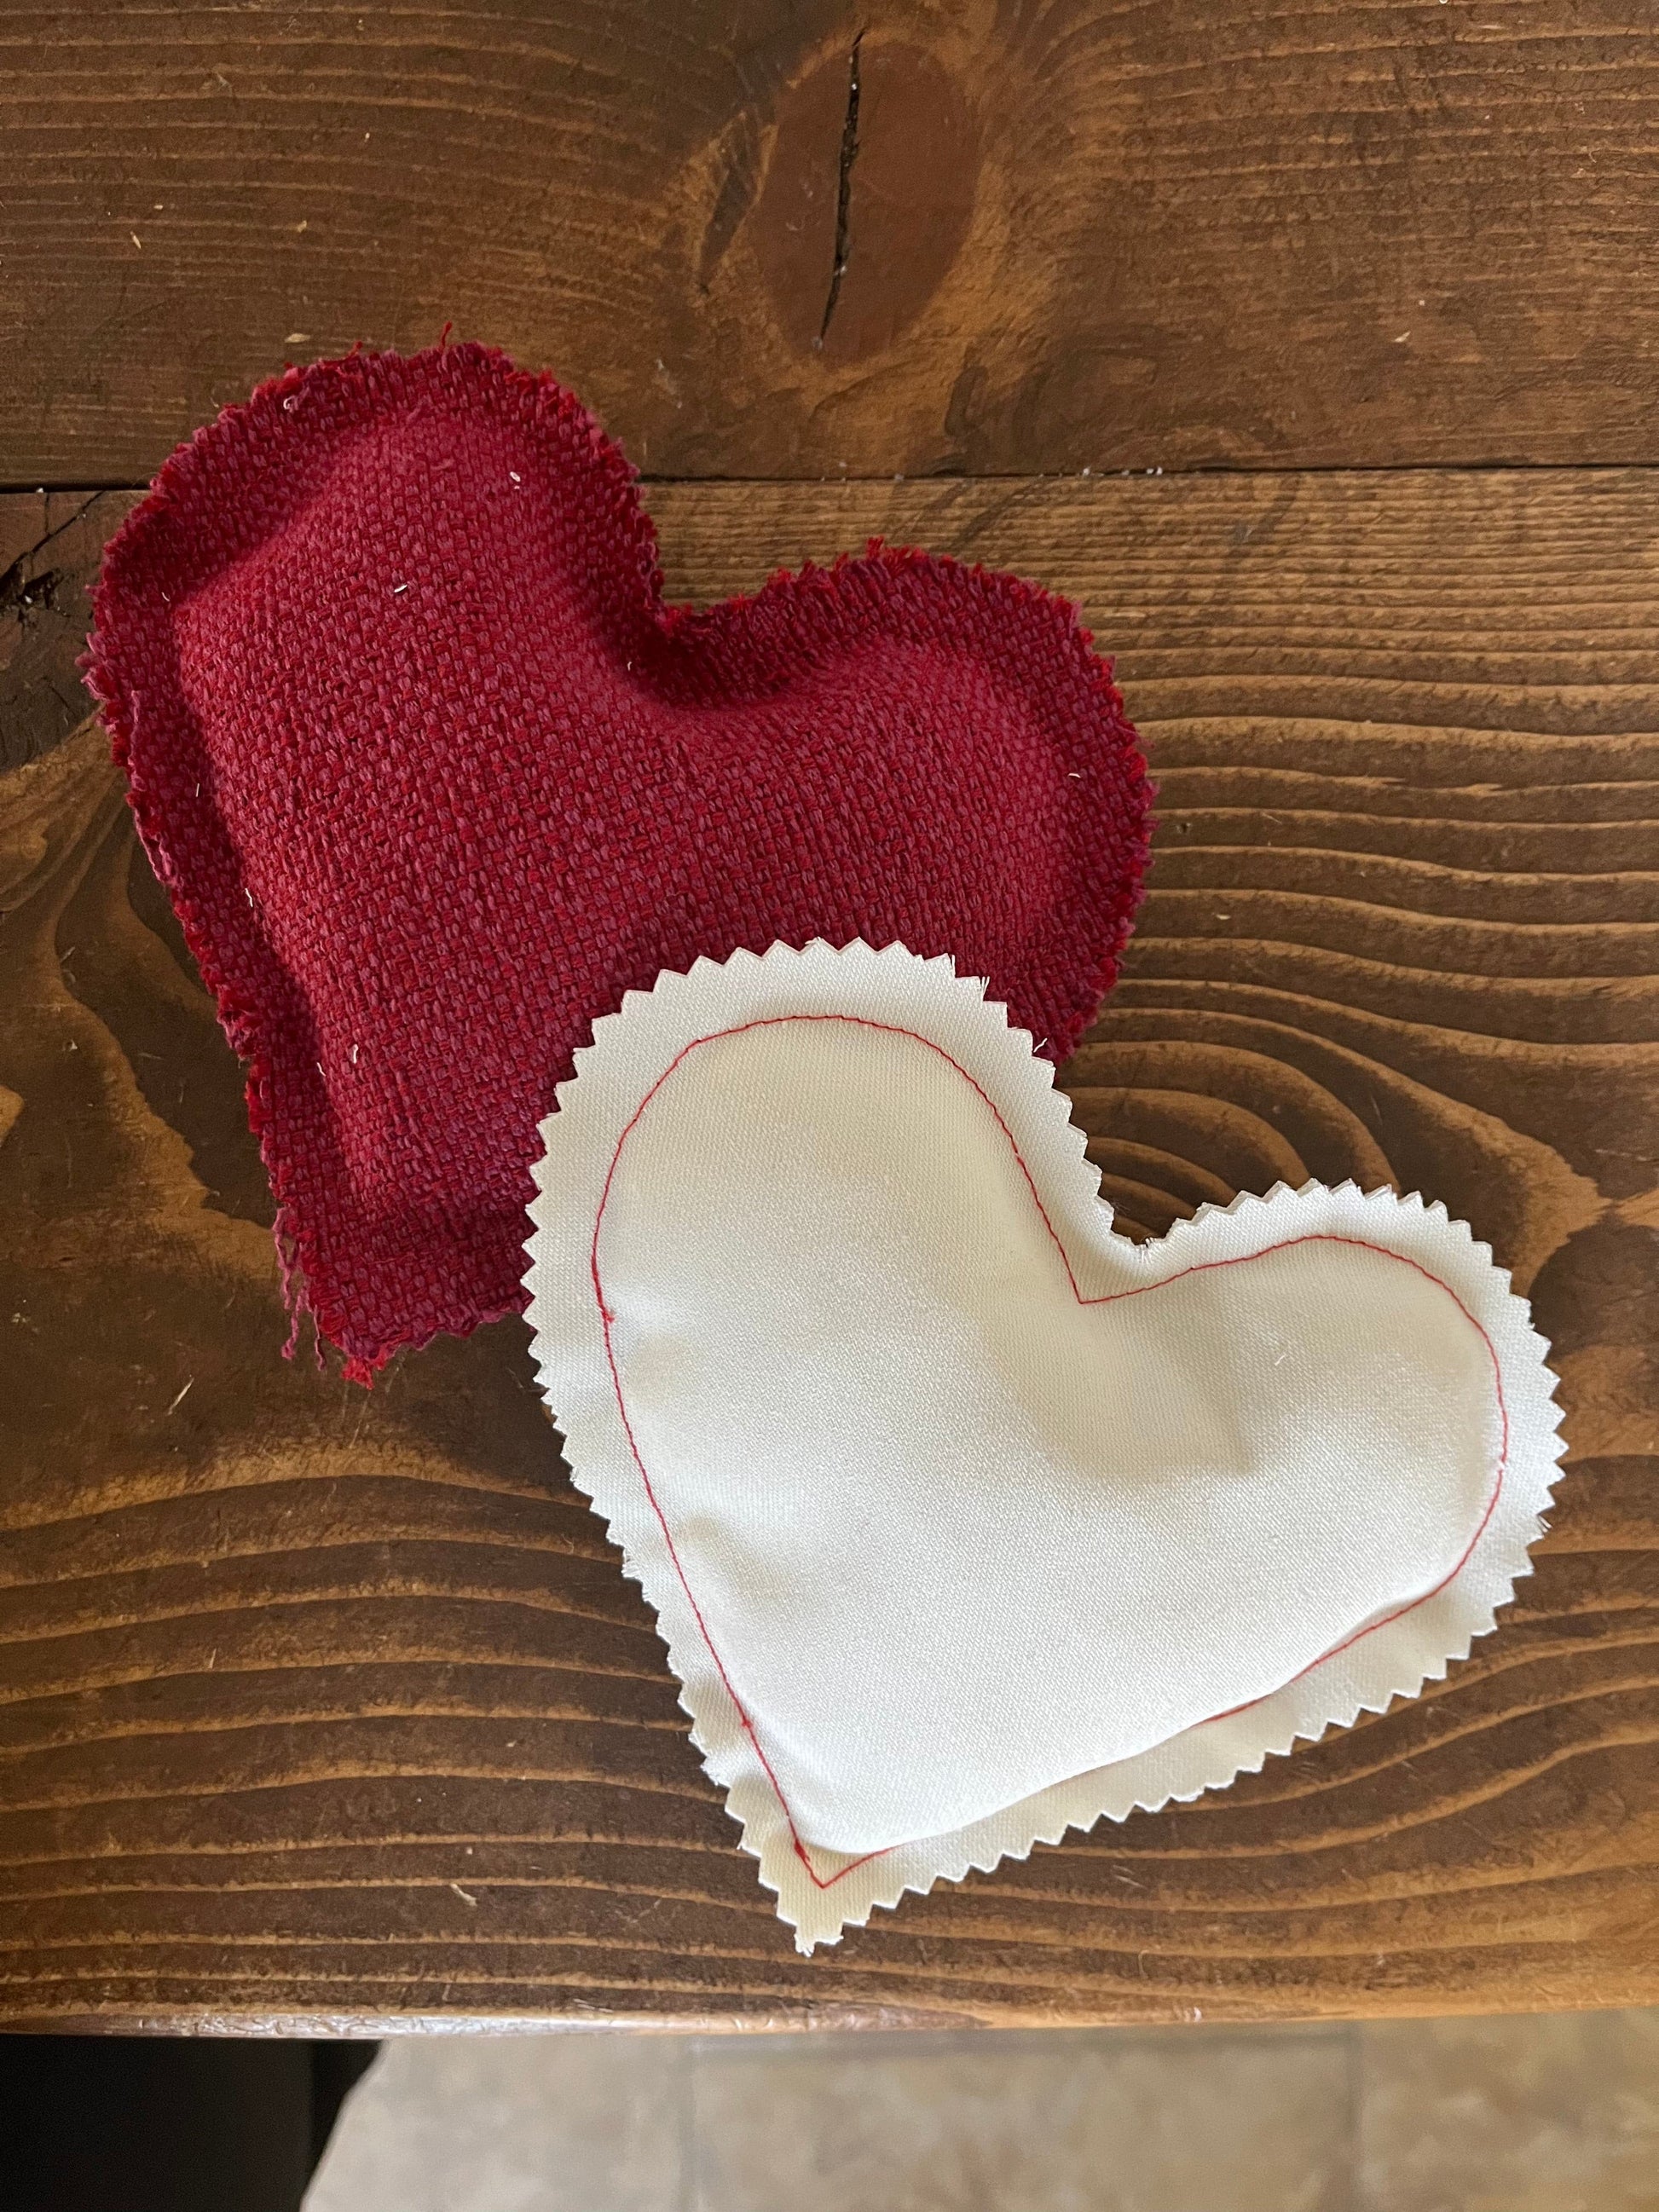 Pictured: Both Red and Natural coloured fabric hearts for valentine's day